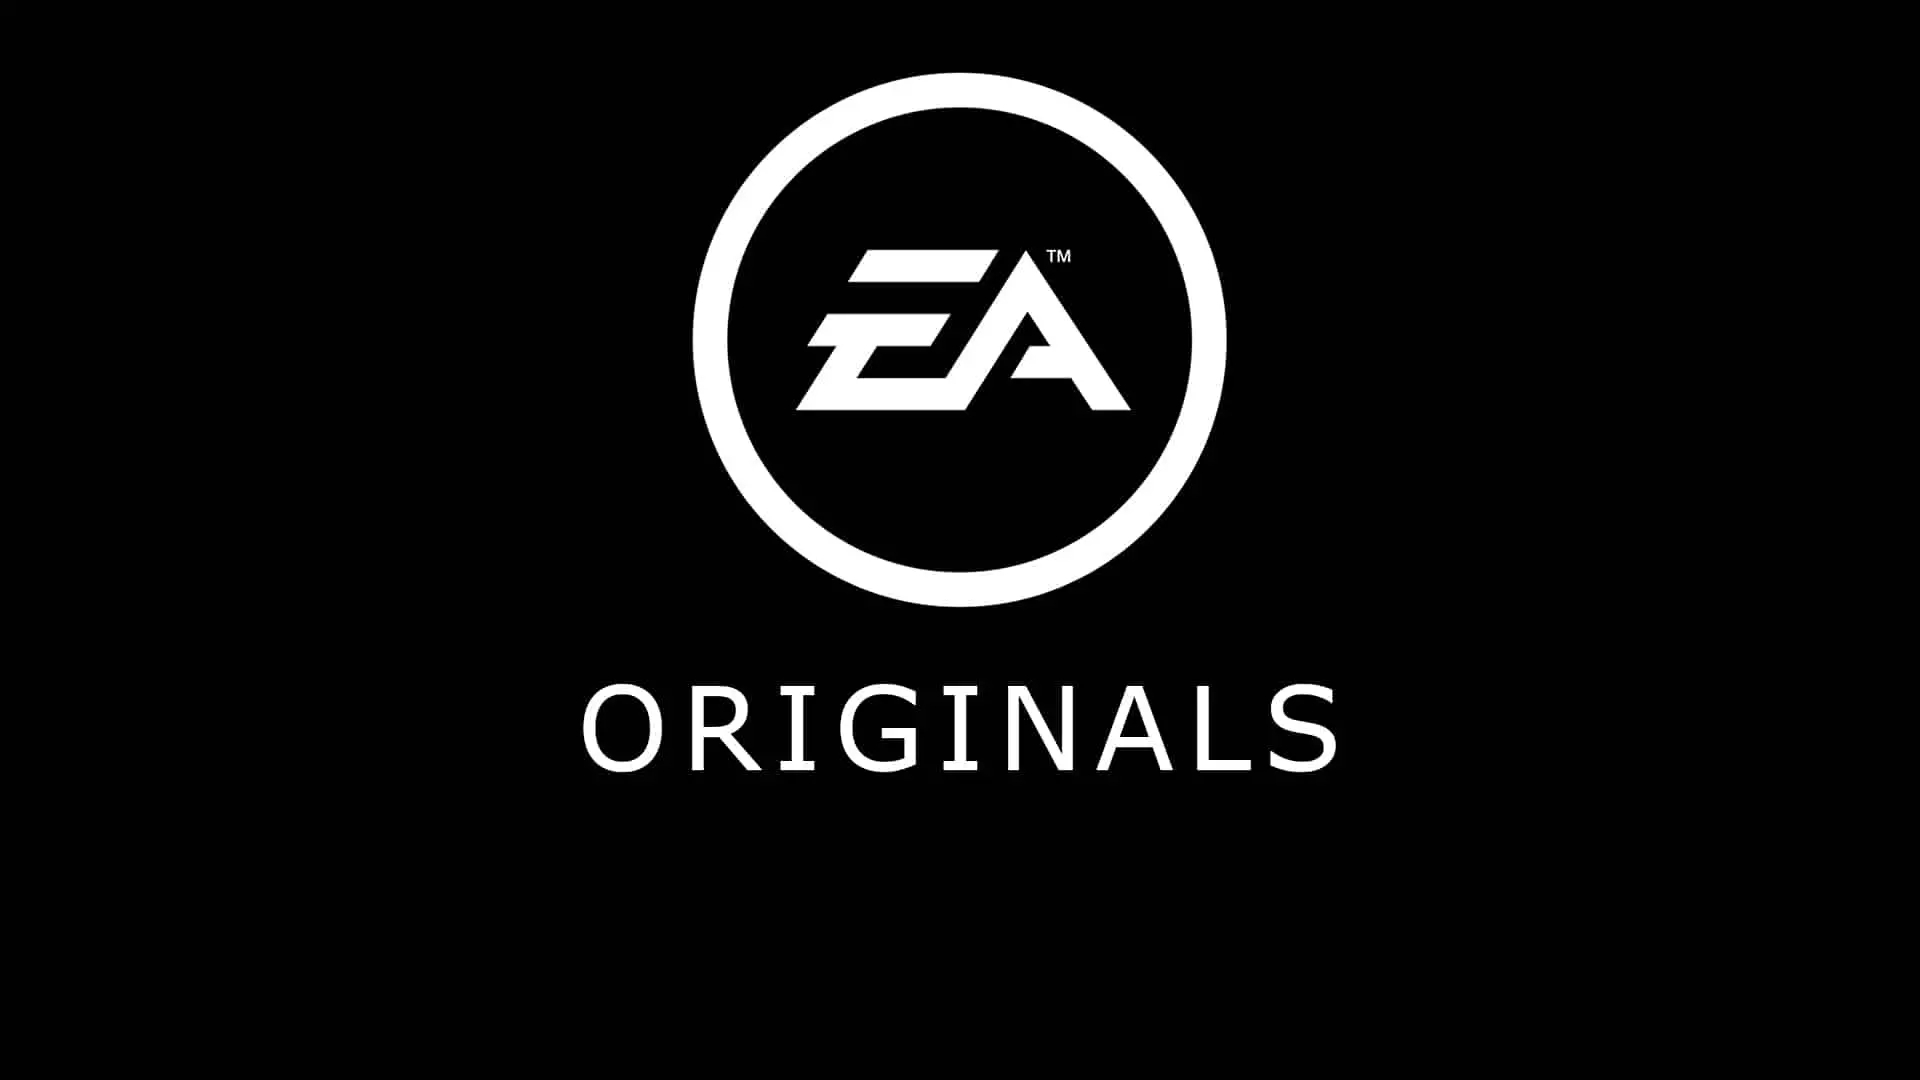 EA gives strategy a twist with its Originals label